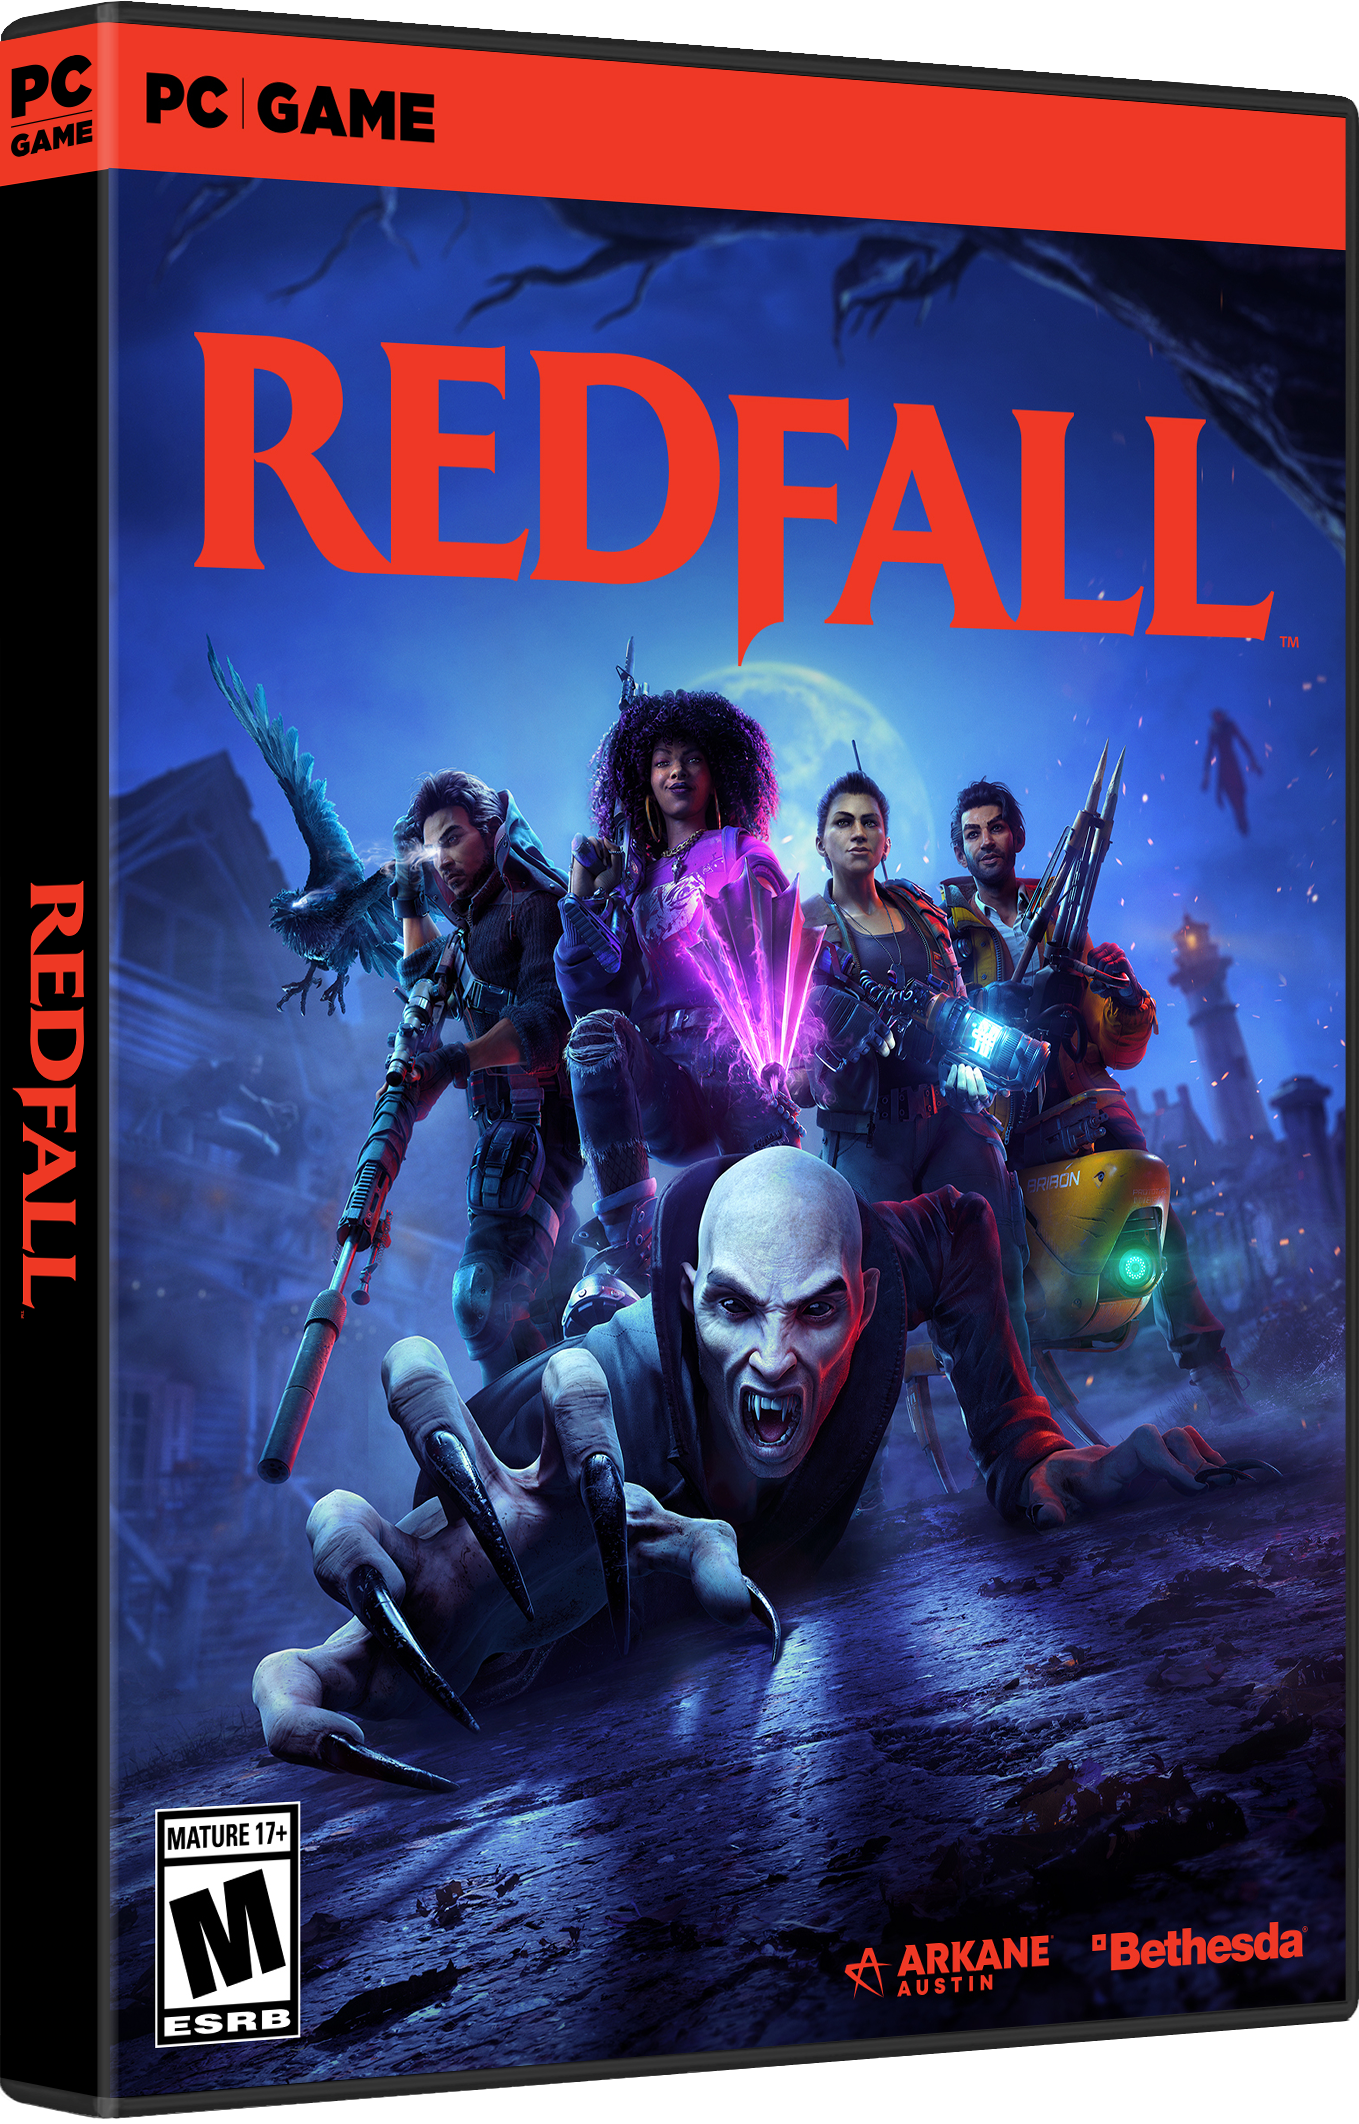  Redfall: Standard Edition - PC : Video Games